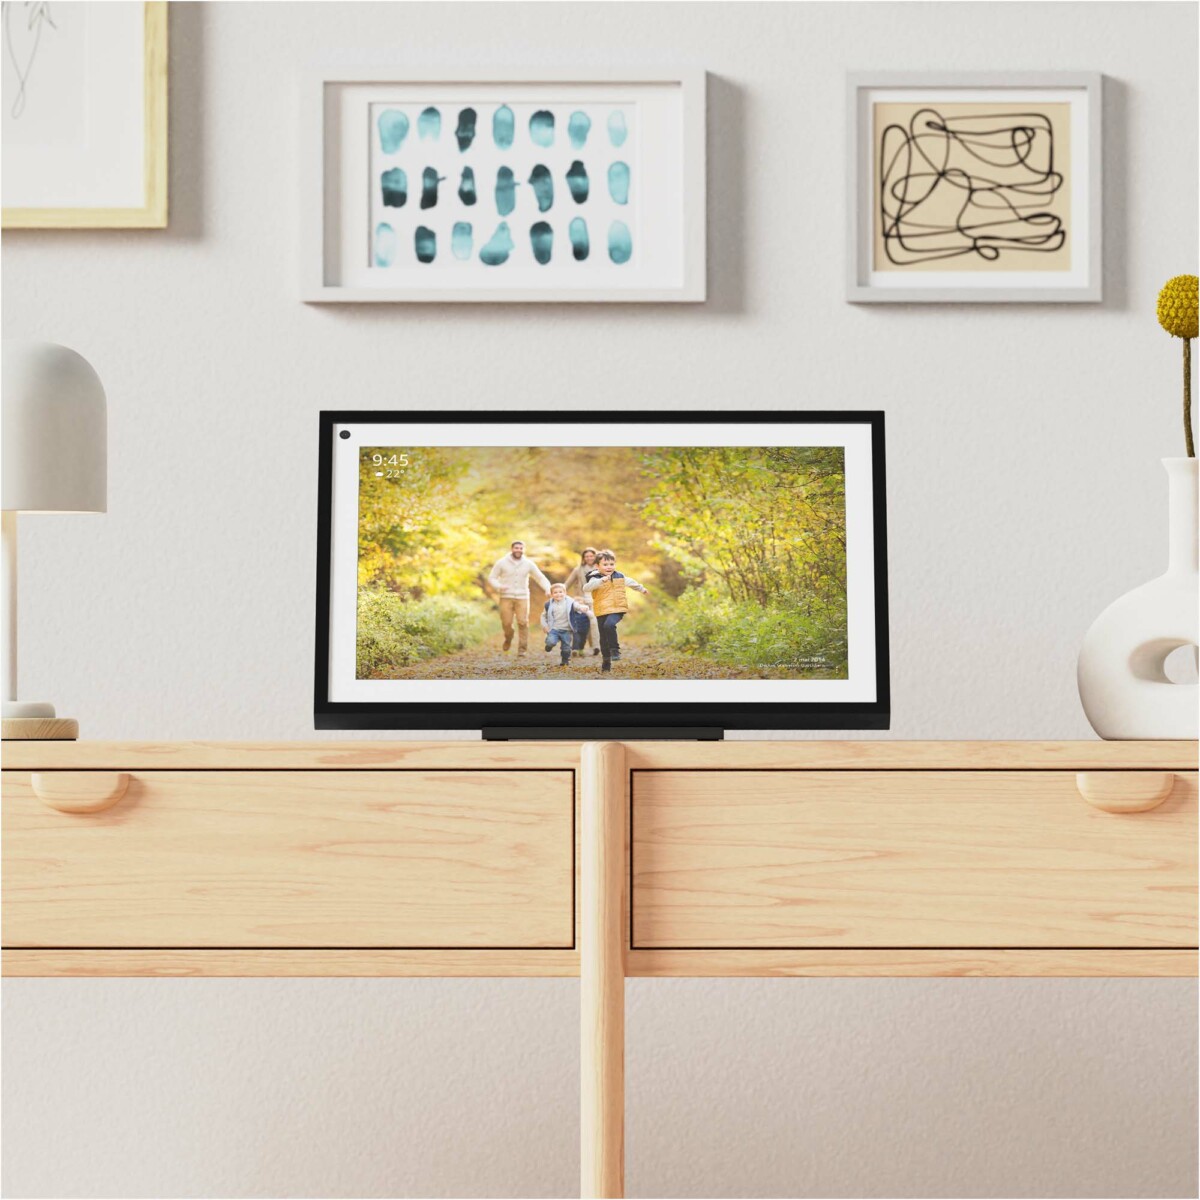 The Echo Show 15, the smart and multifunctional screen for your daily life